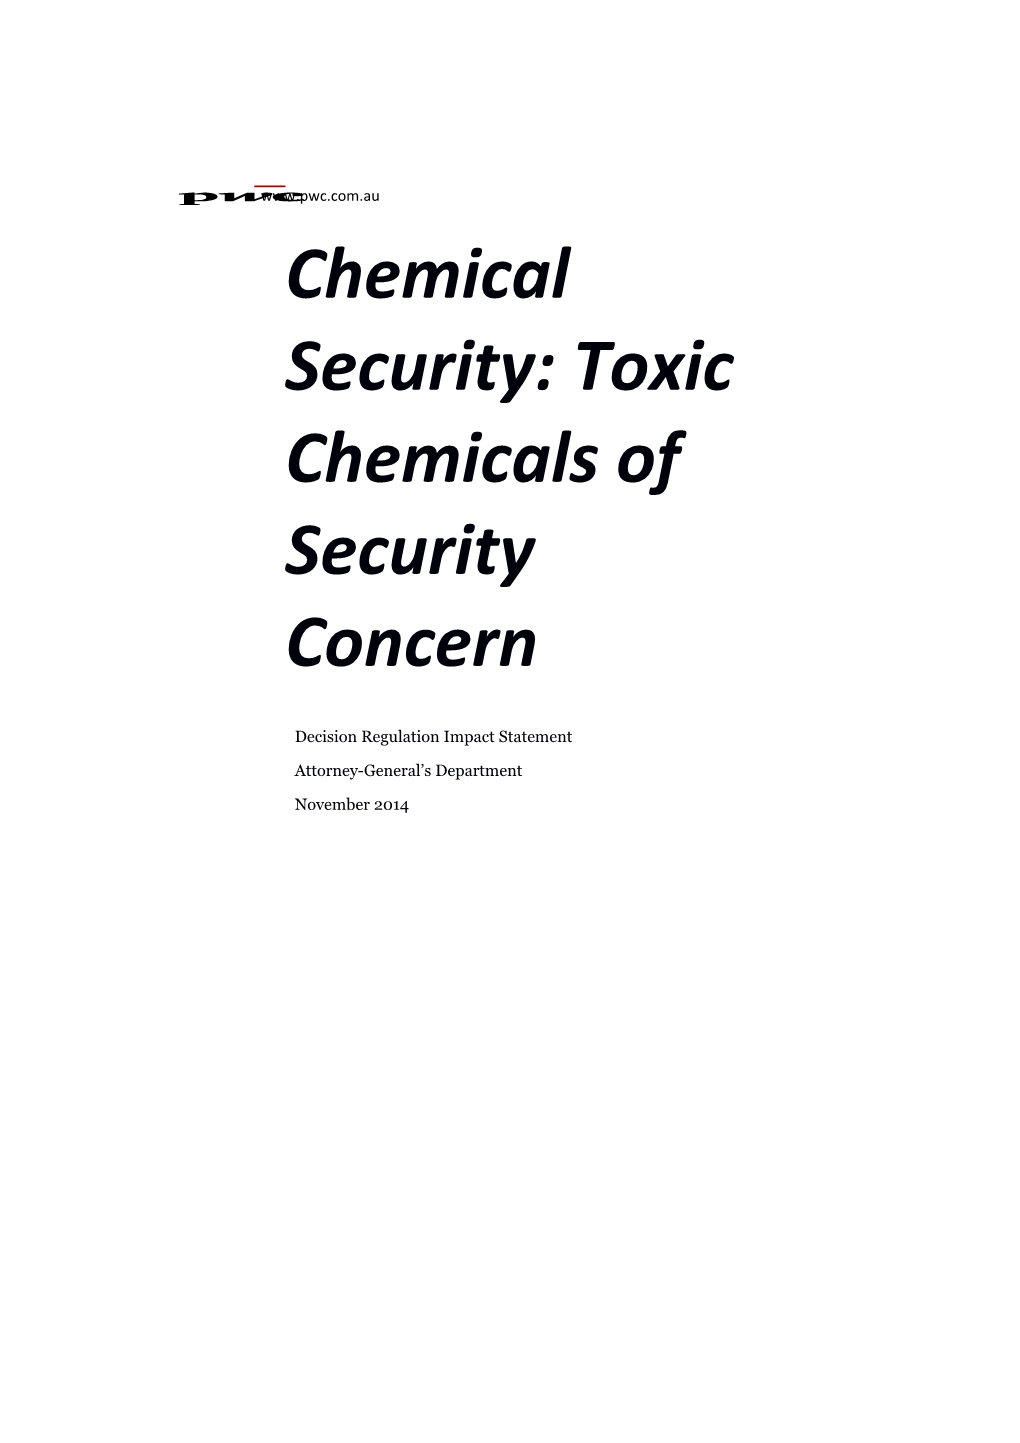 Chemical Security: Toxic Chemicals of Security Concern Consultation Regulation Impact Statement